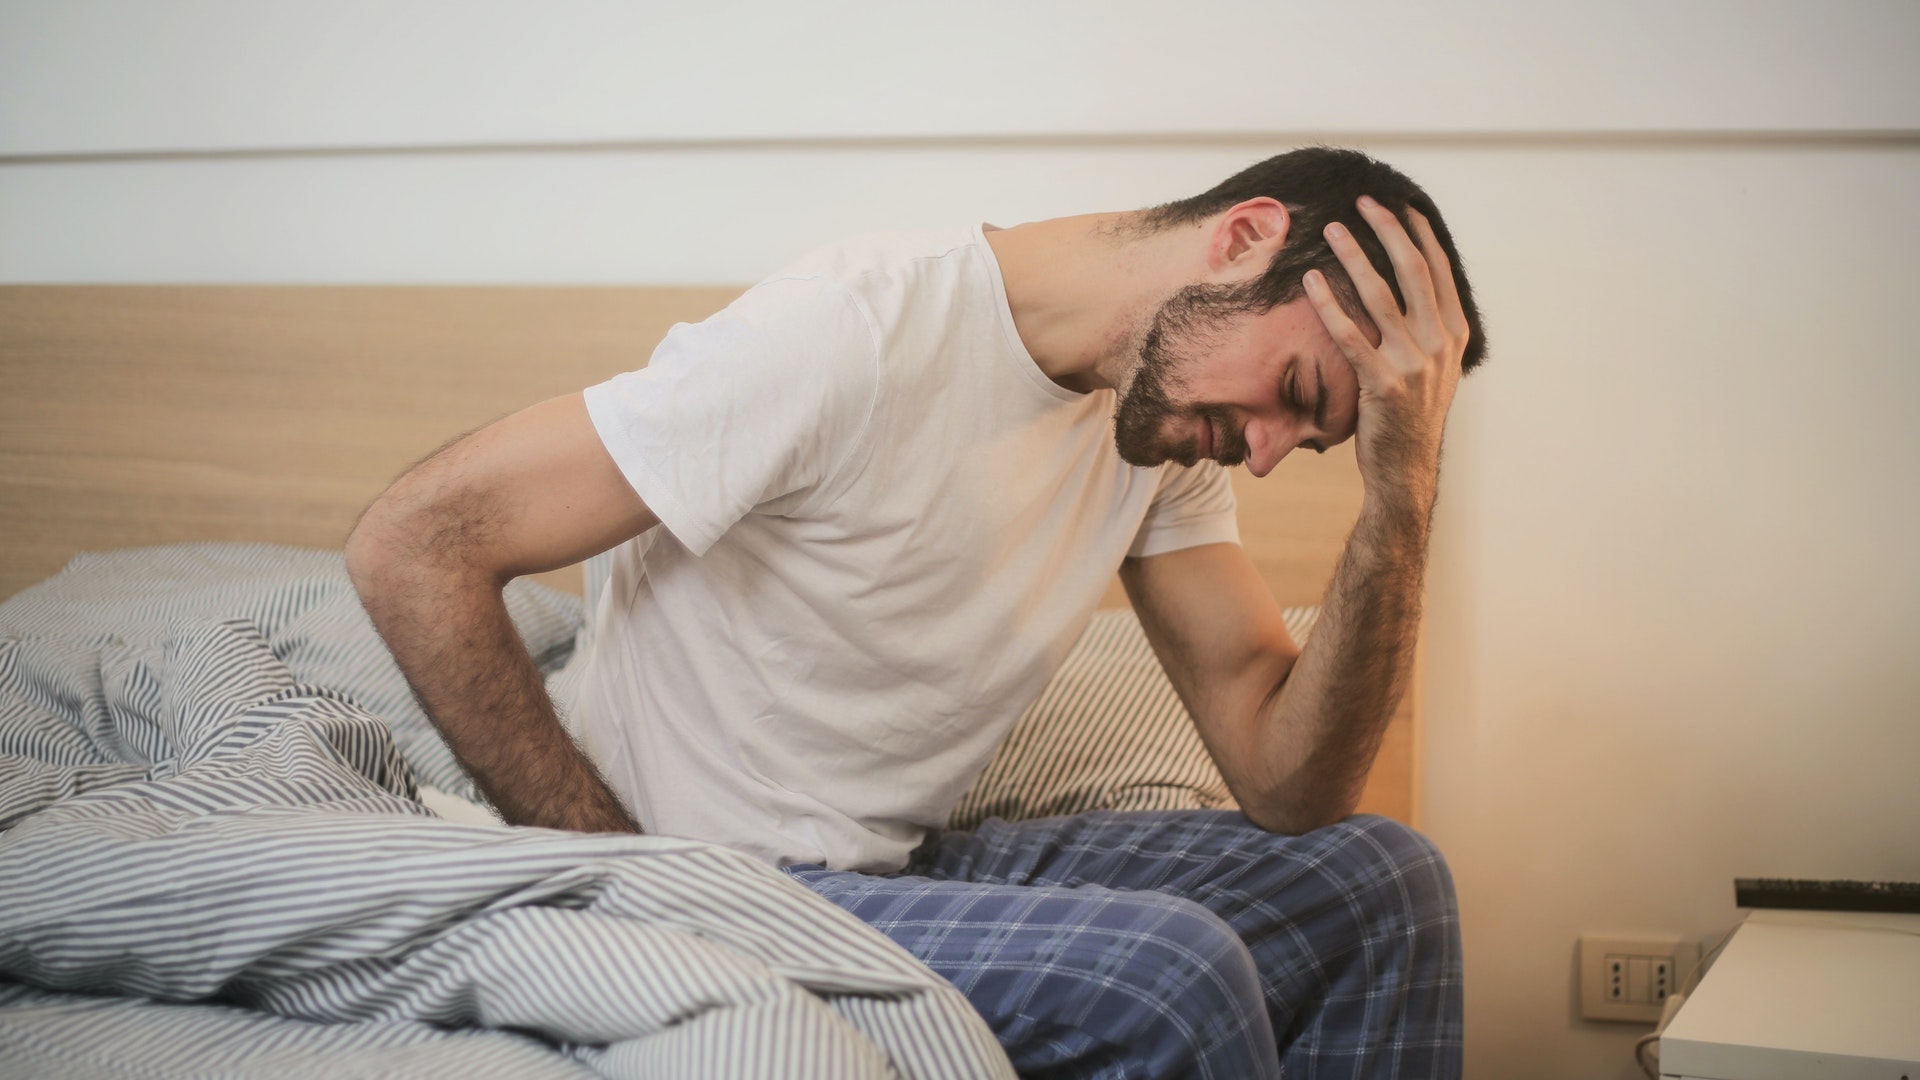 Man sitting on the edge of his bed holding his head in pain. Nearly 90 per cent of disabled people surveyed said they had little confidence the government would consider the benefits assessments changes they wanted.